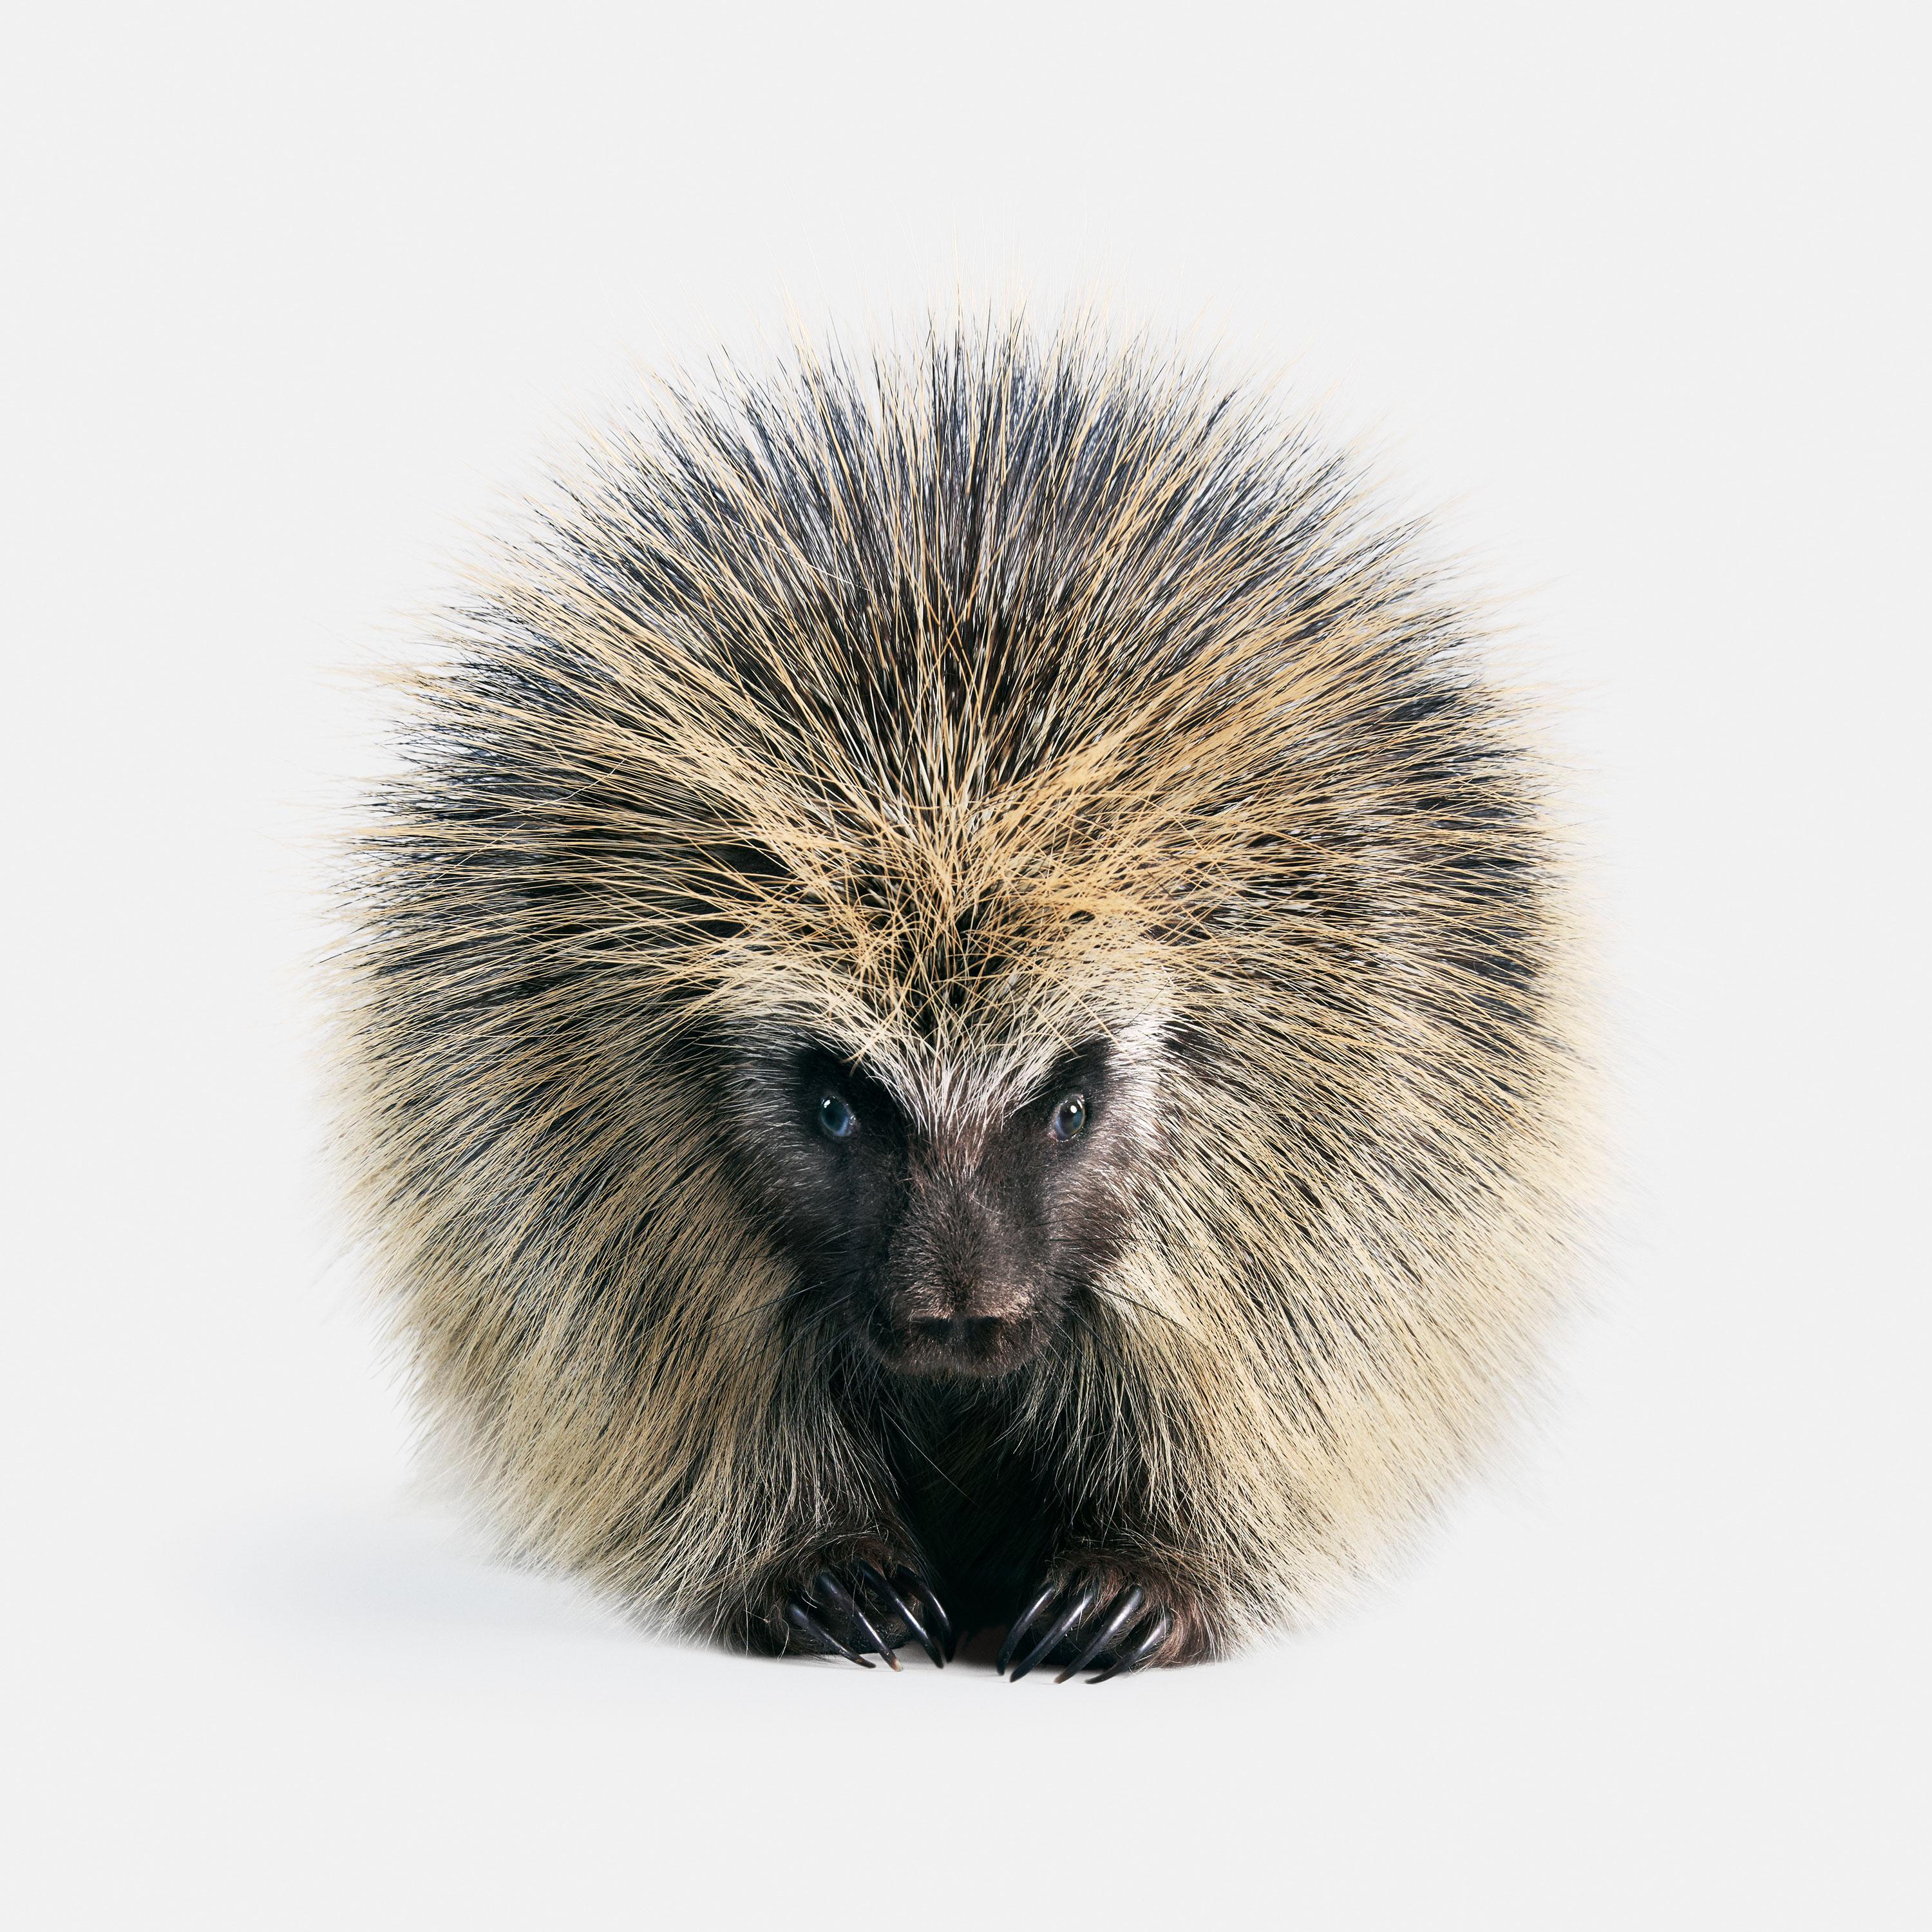 Randal Ford Color Photograph - North American Porcupine (40" x 40")